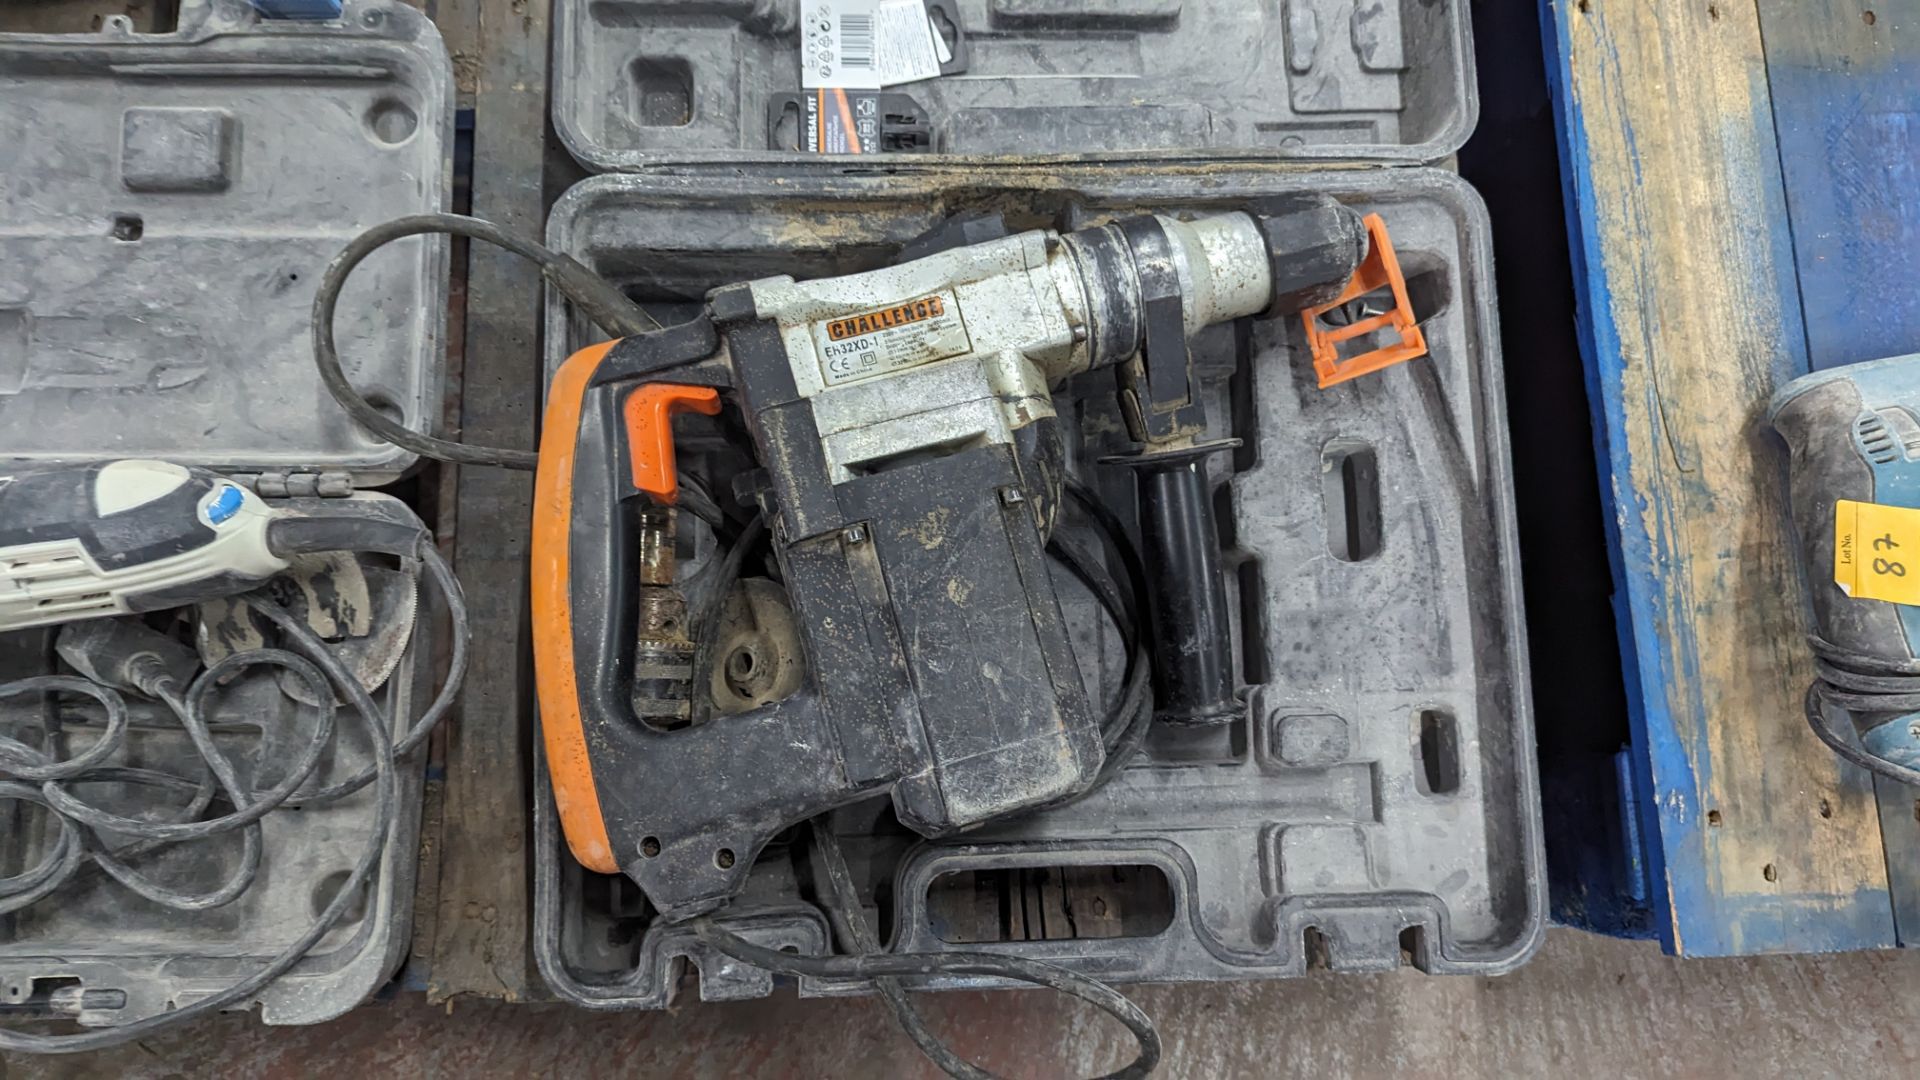 Challenge model EH32XD-1 heavy duty hammer drill in case - Image 4 of 6